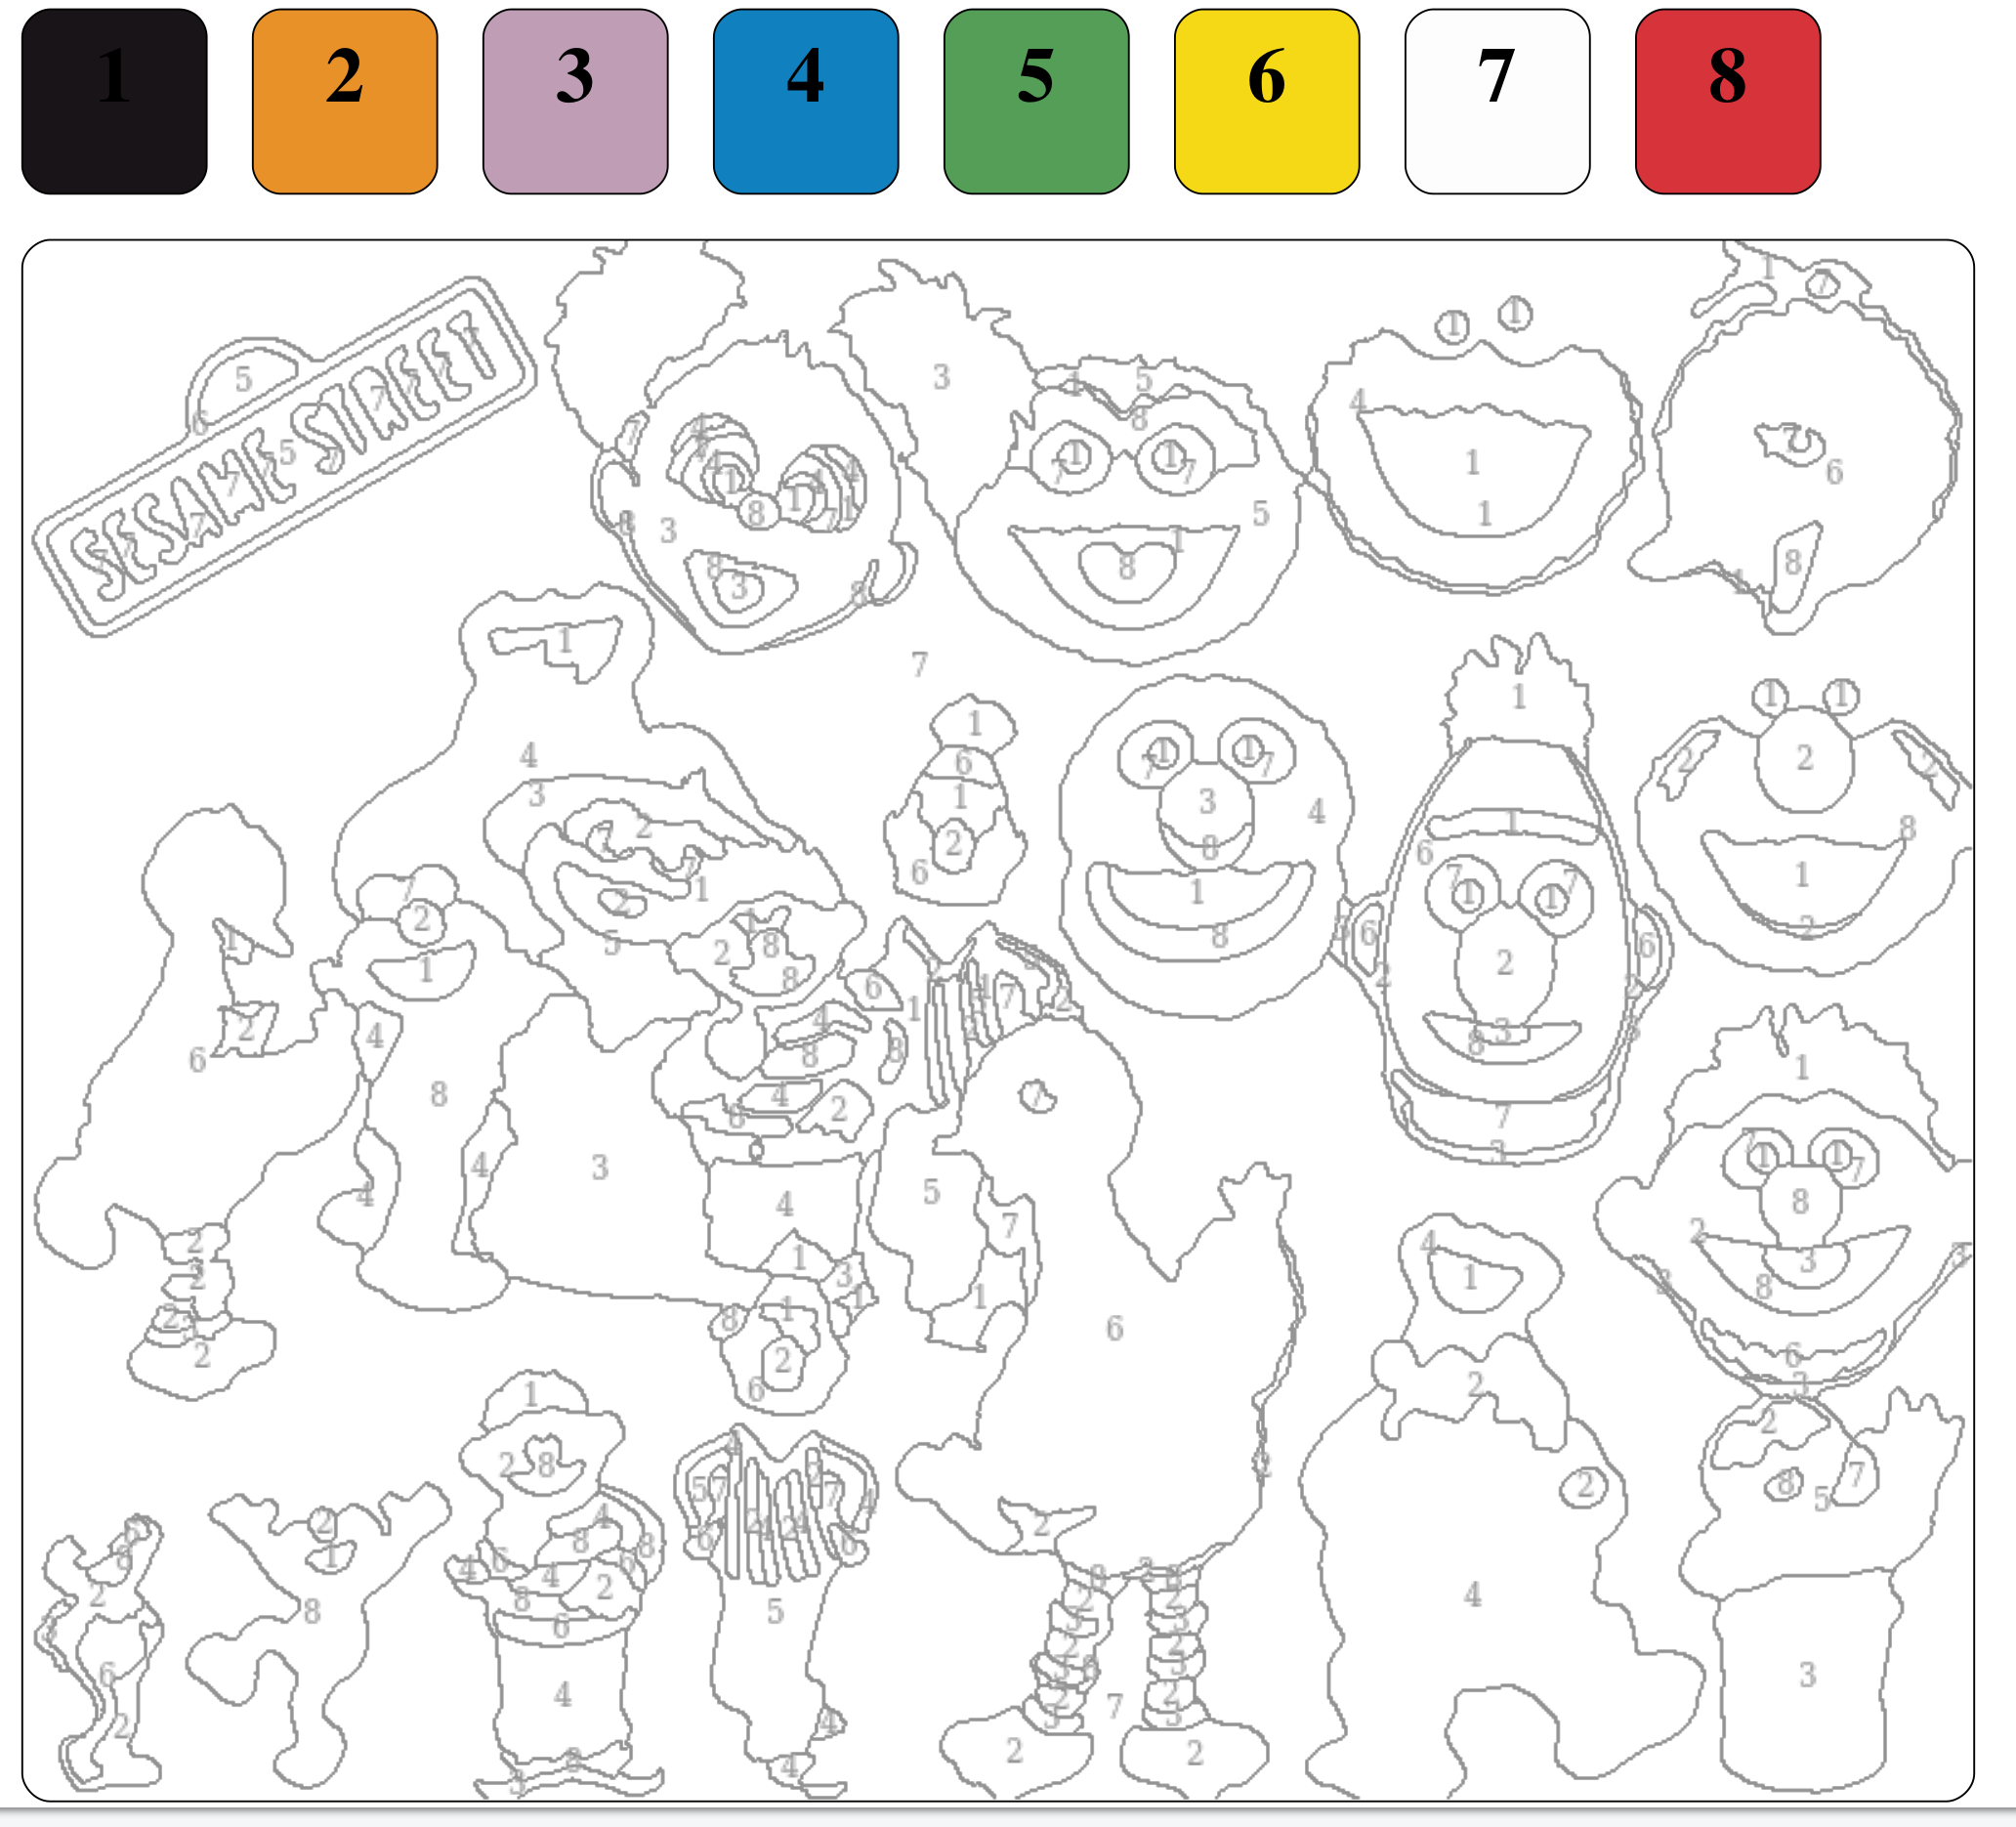 A paint by number template:The sesame street characters are outlined, and the color to paint them is written in each section of the outline